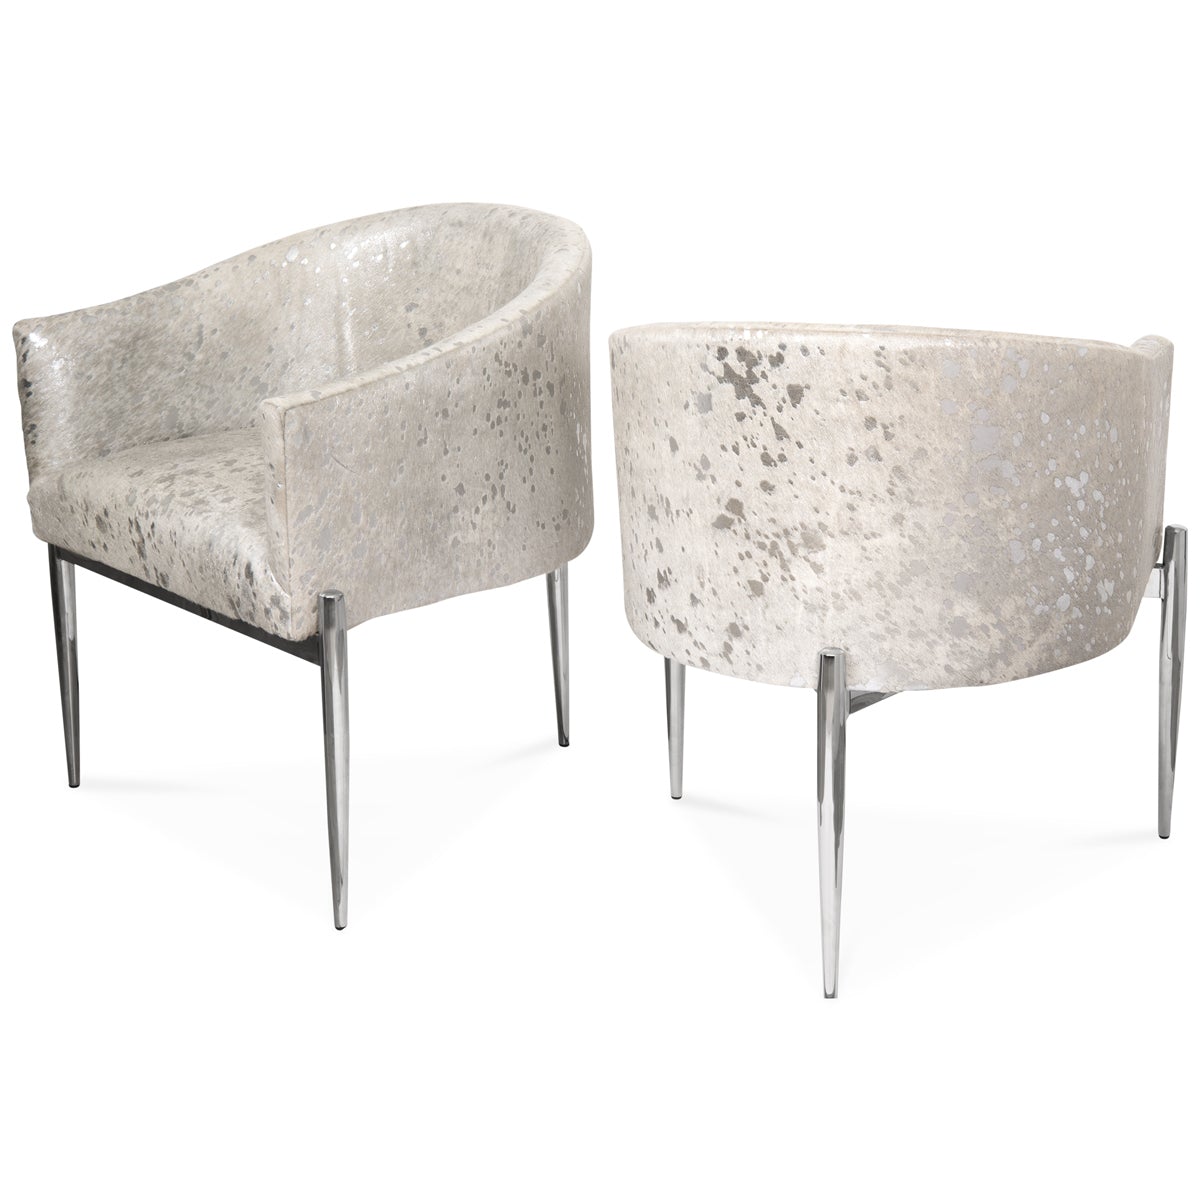 Art Deco Dining Chair in Silver Speckled Cowhide - ModShop1.com